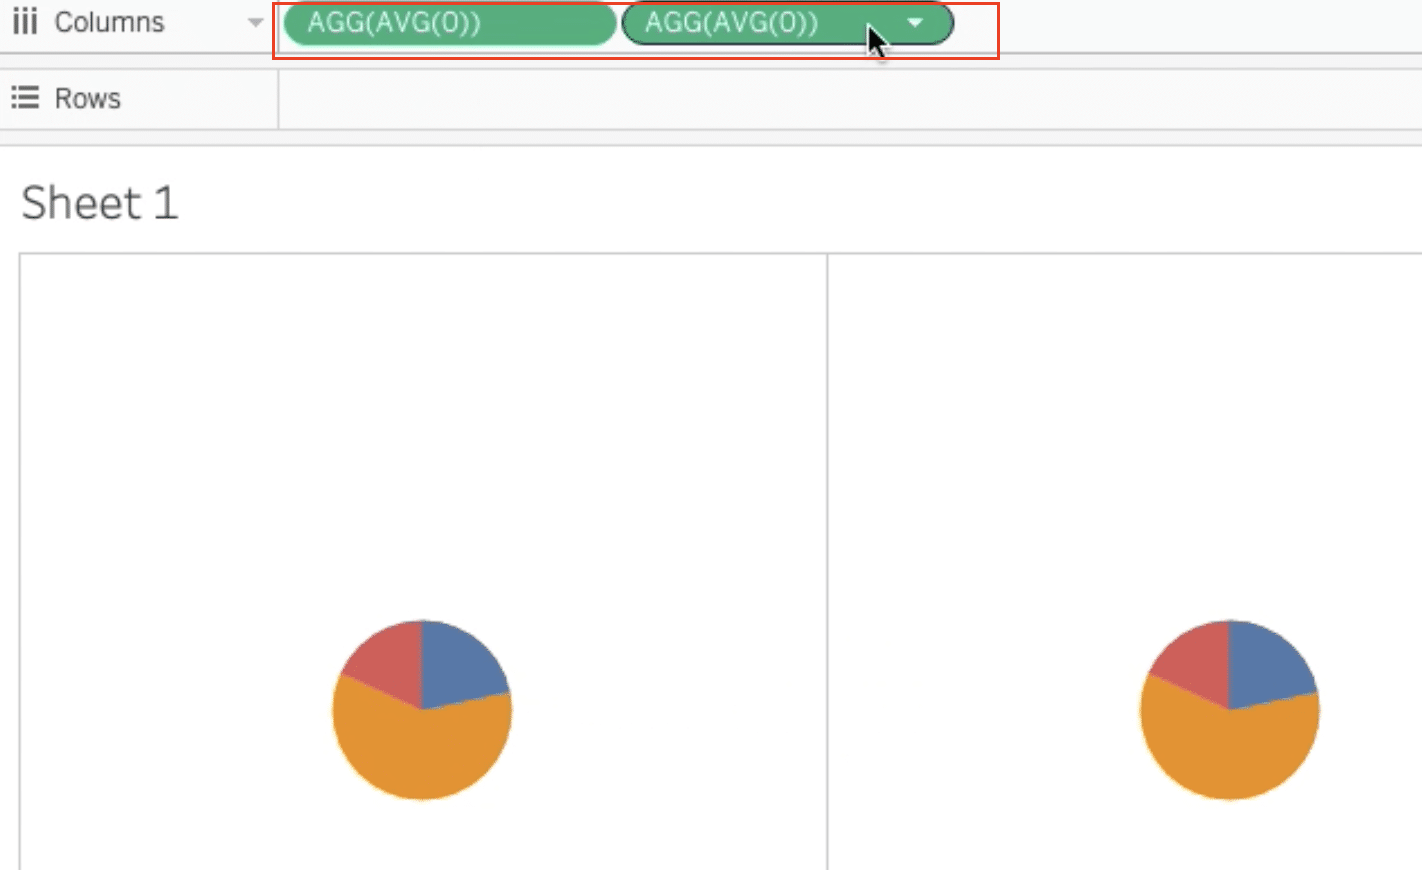 Creating a dual axis by overlaying two pie charts in Tableau.